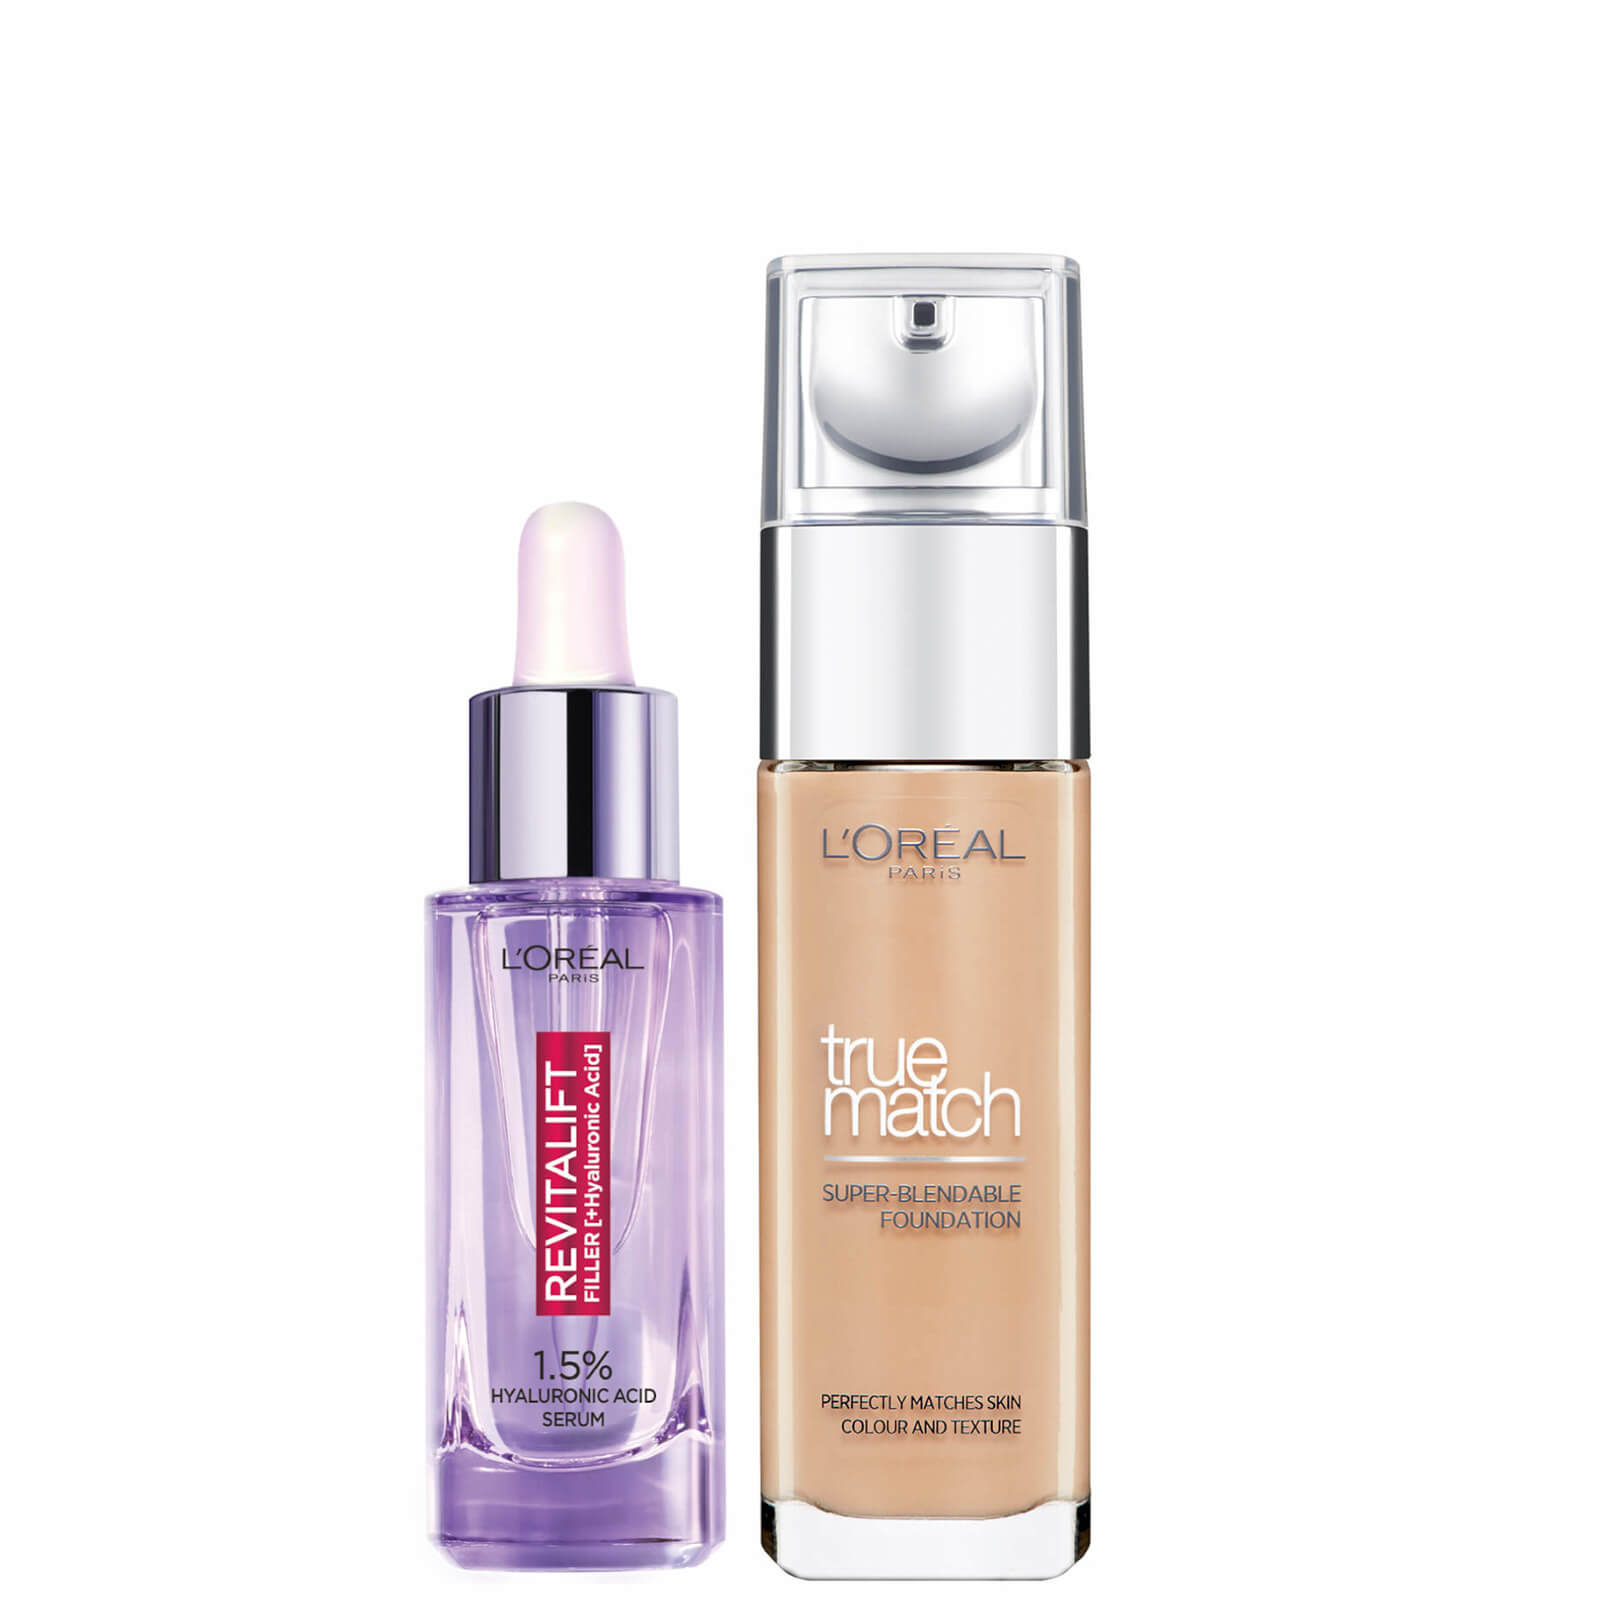 L’Oreal Paris Hyaluronic Acid Filler Serum and True Match Hyaluronic Acid Foundation Duo (Various Shades) - 6.5W Golden Toffee